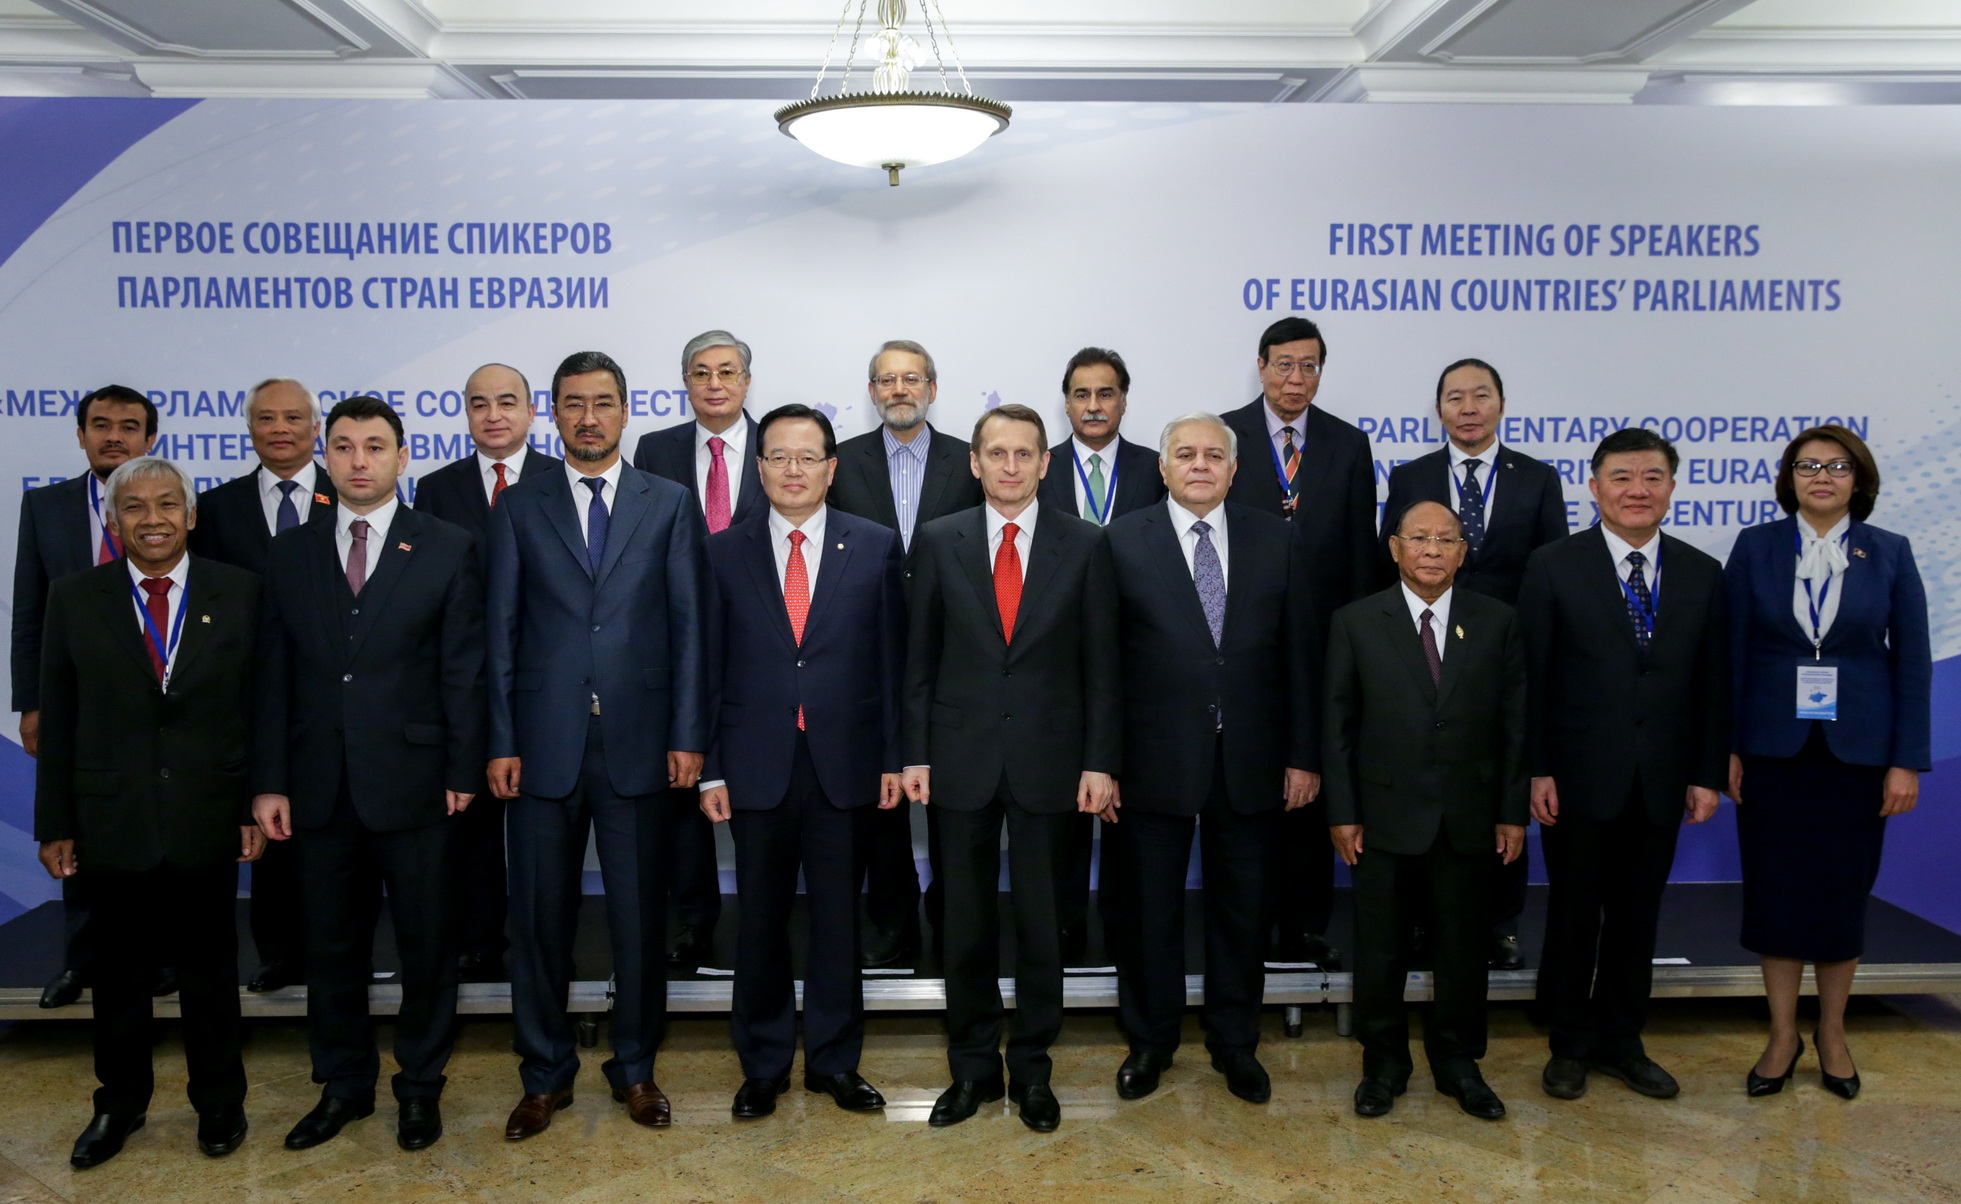 The First Meeting of Speakers of Eurasian Countries’ Parliaments - Sharing of a common vision for the future of Eurasia and adoption of a final statement